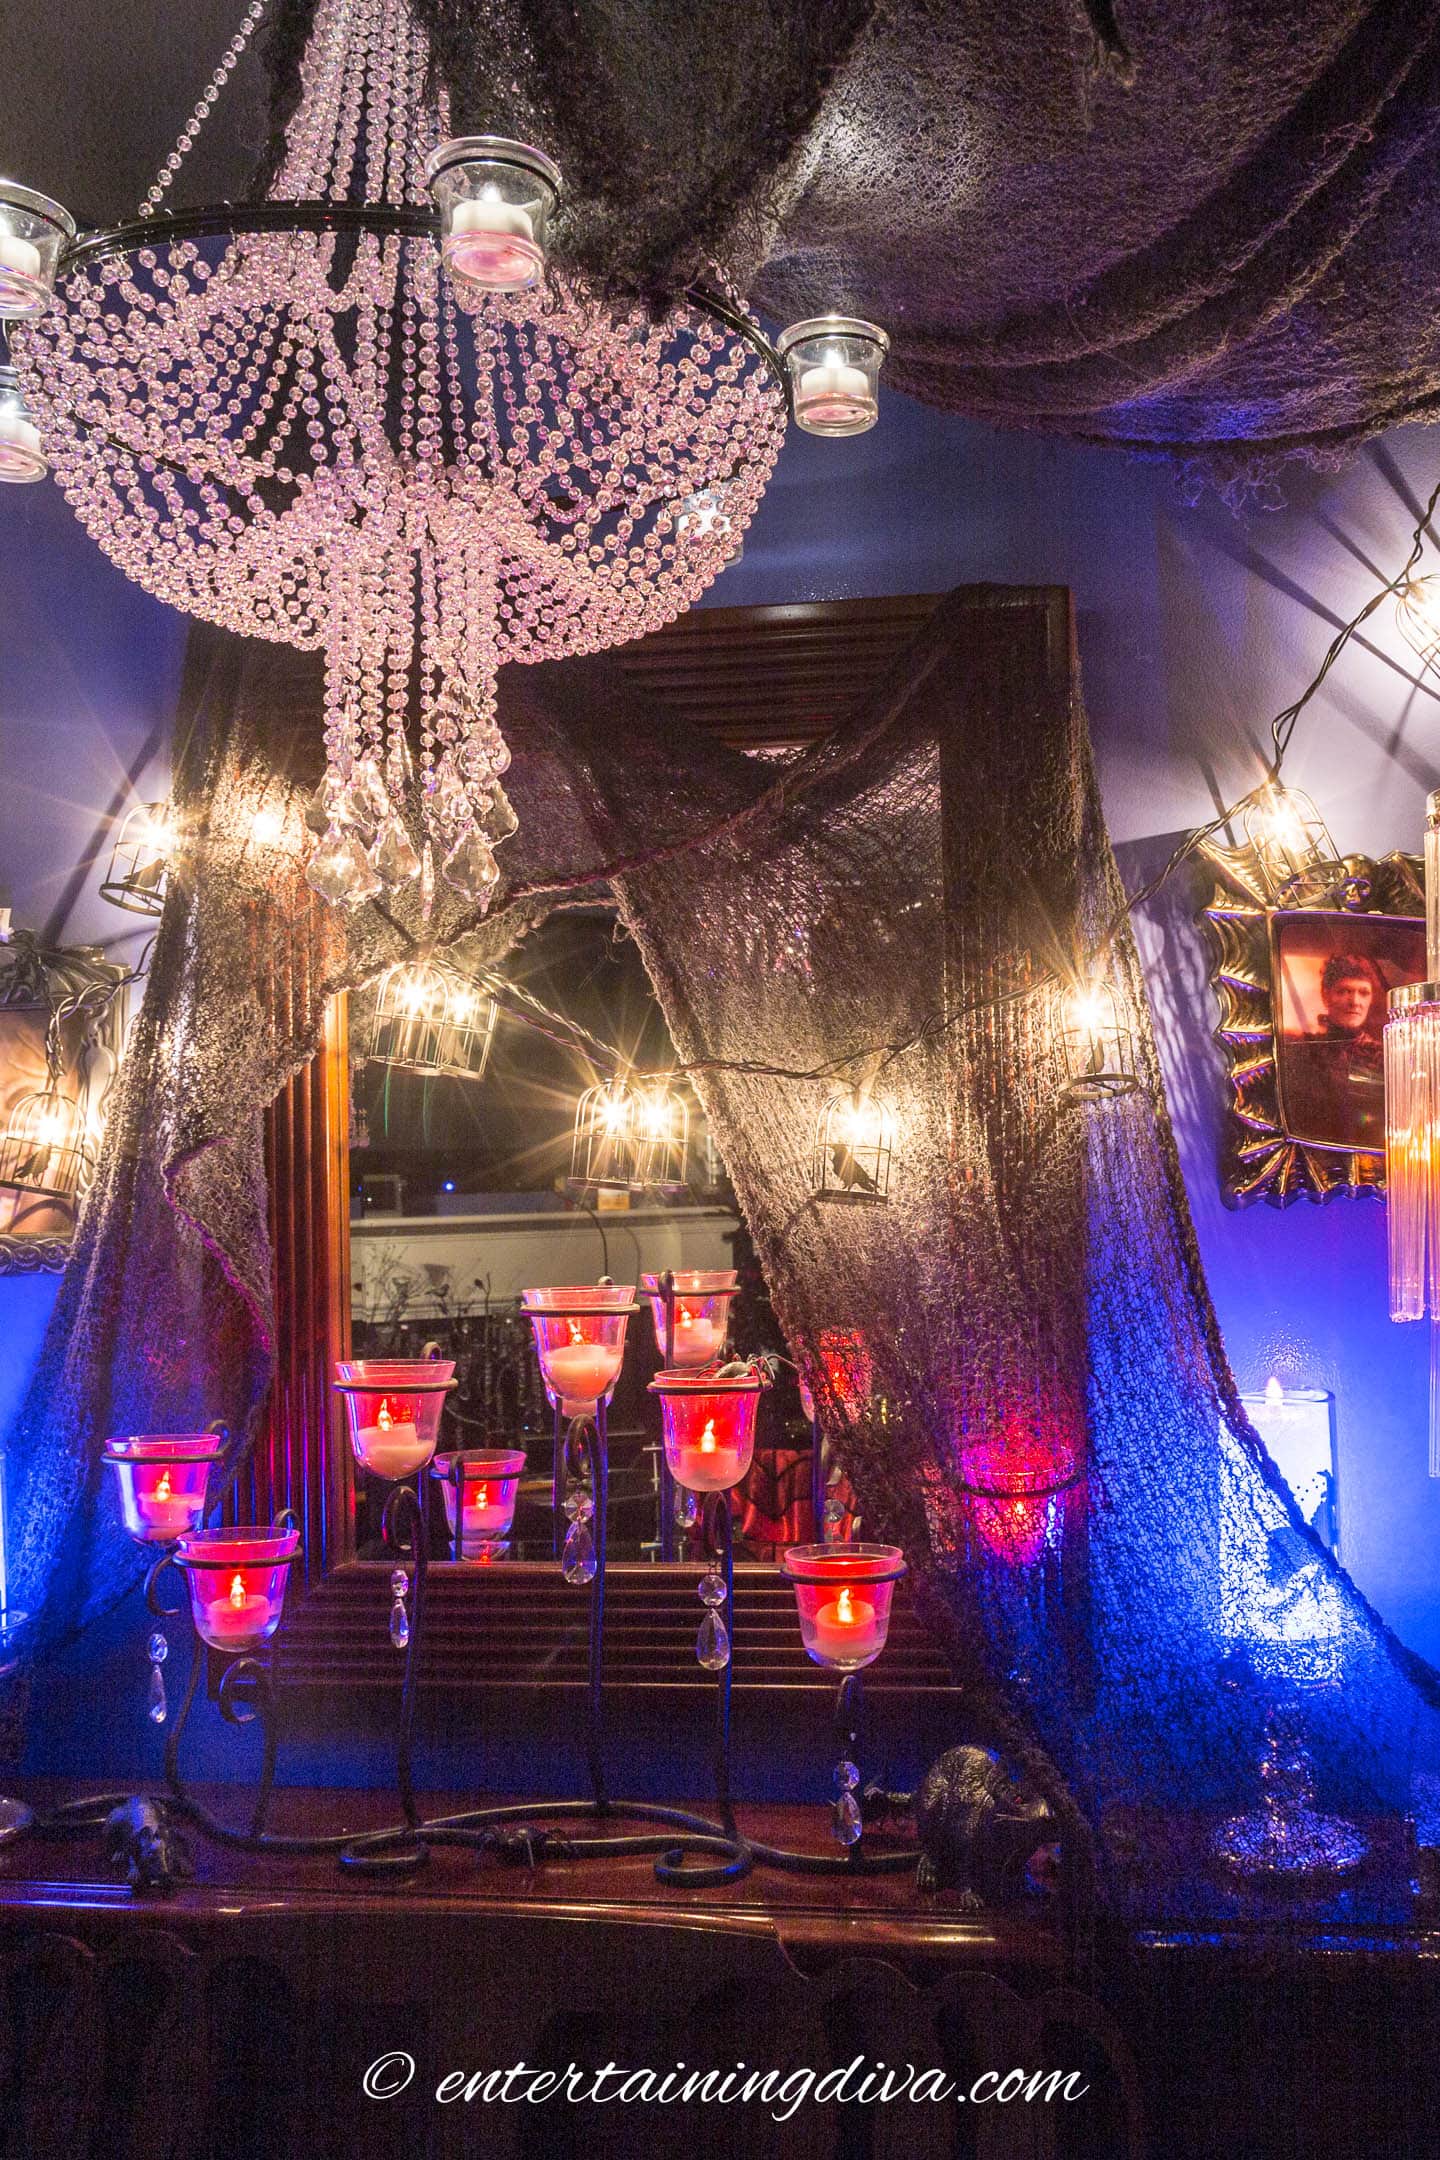 A mirror and chandelier draped with creepy cloth and Halloween lighting